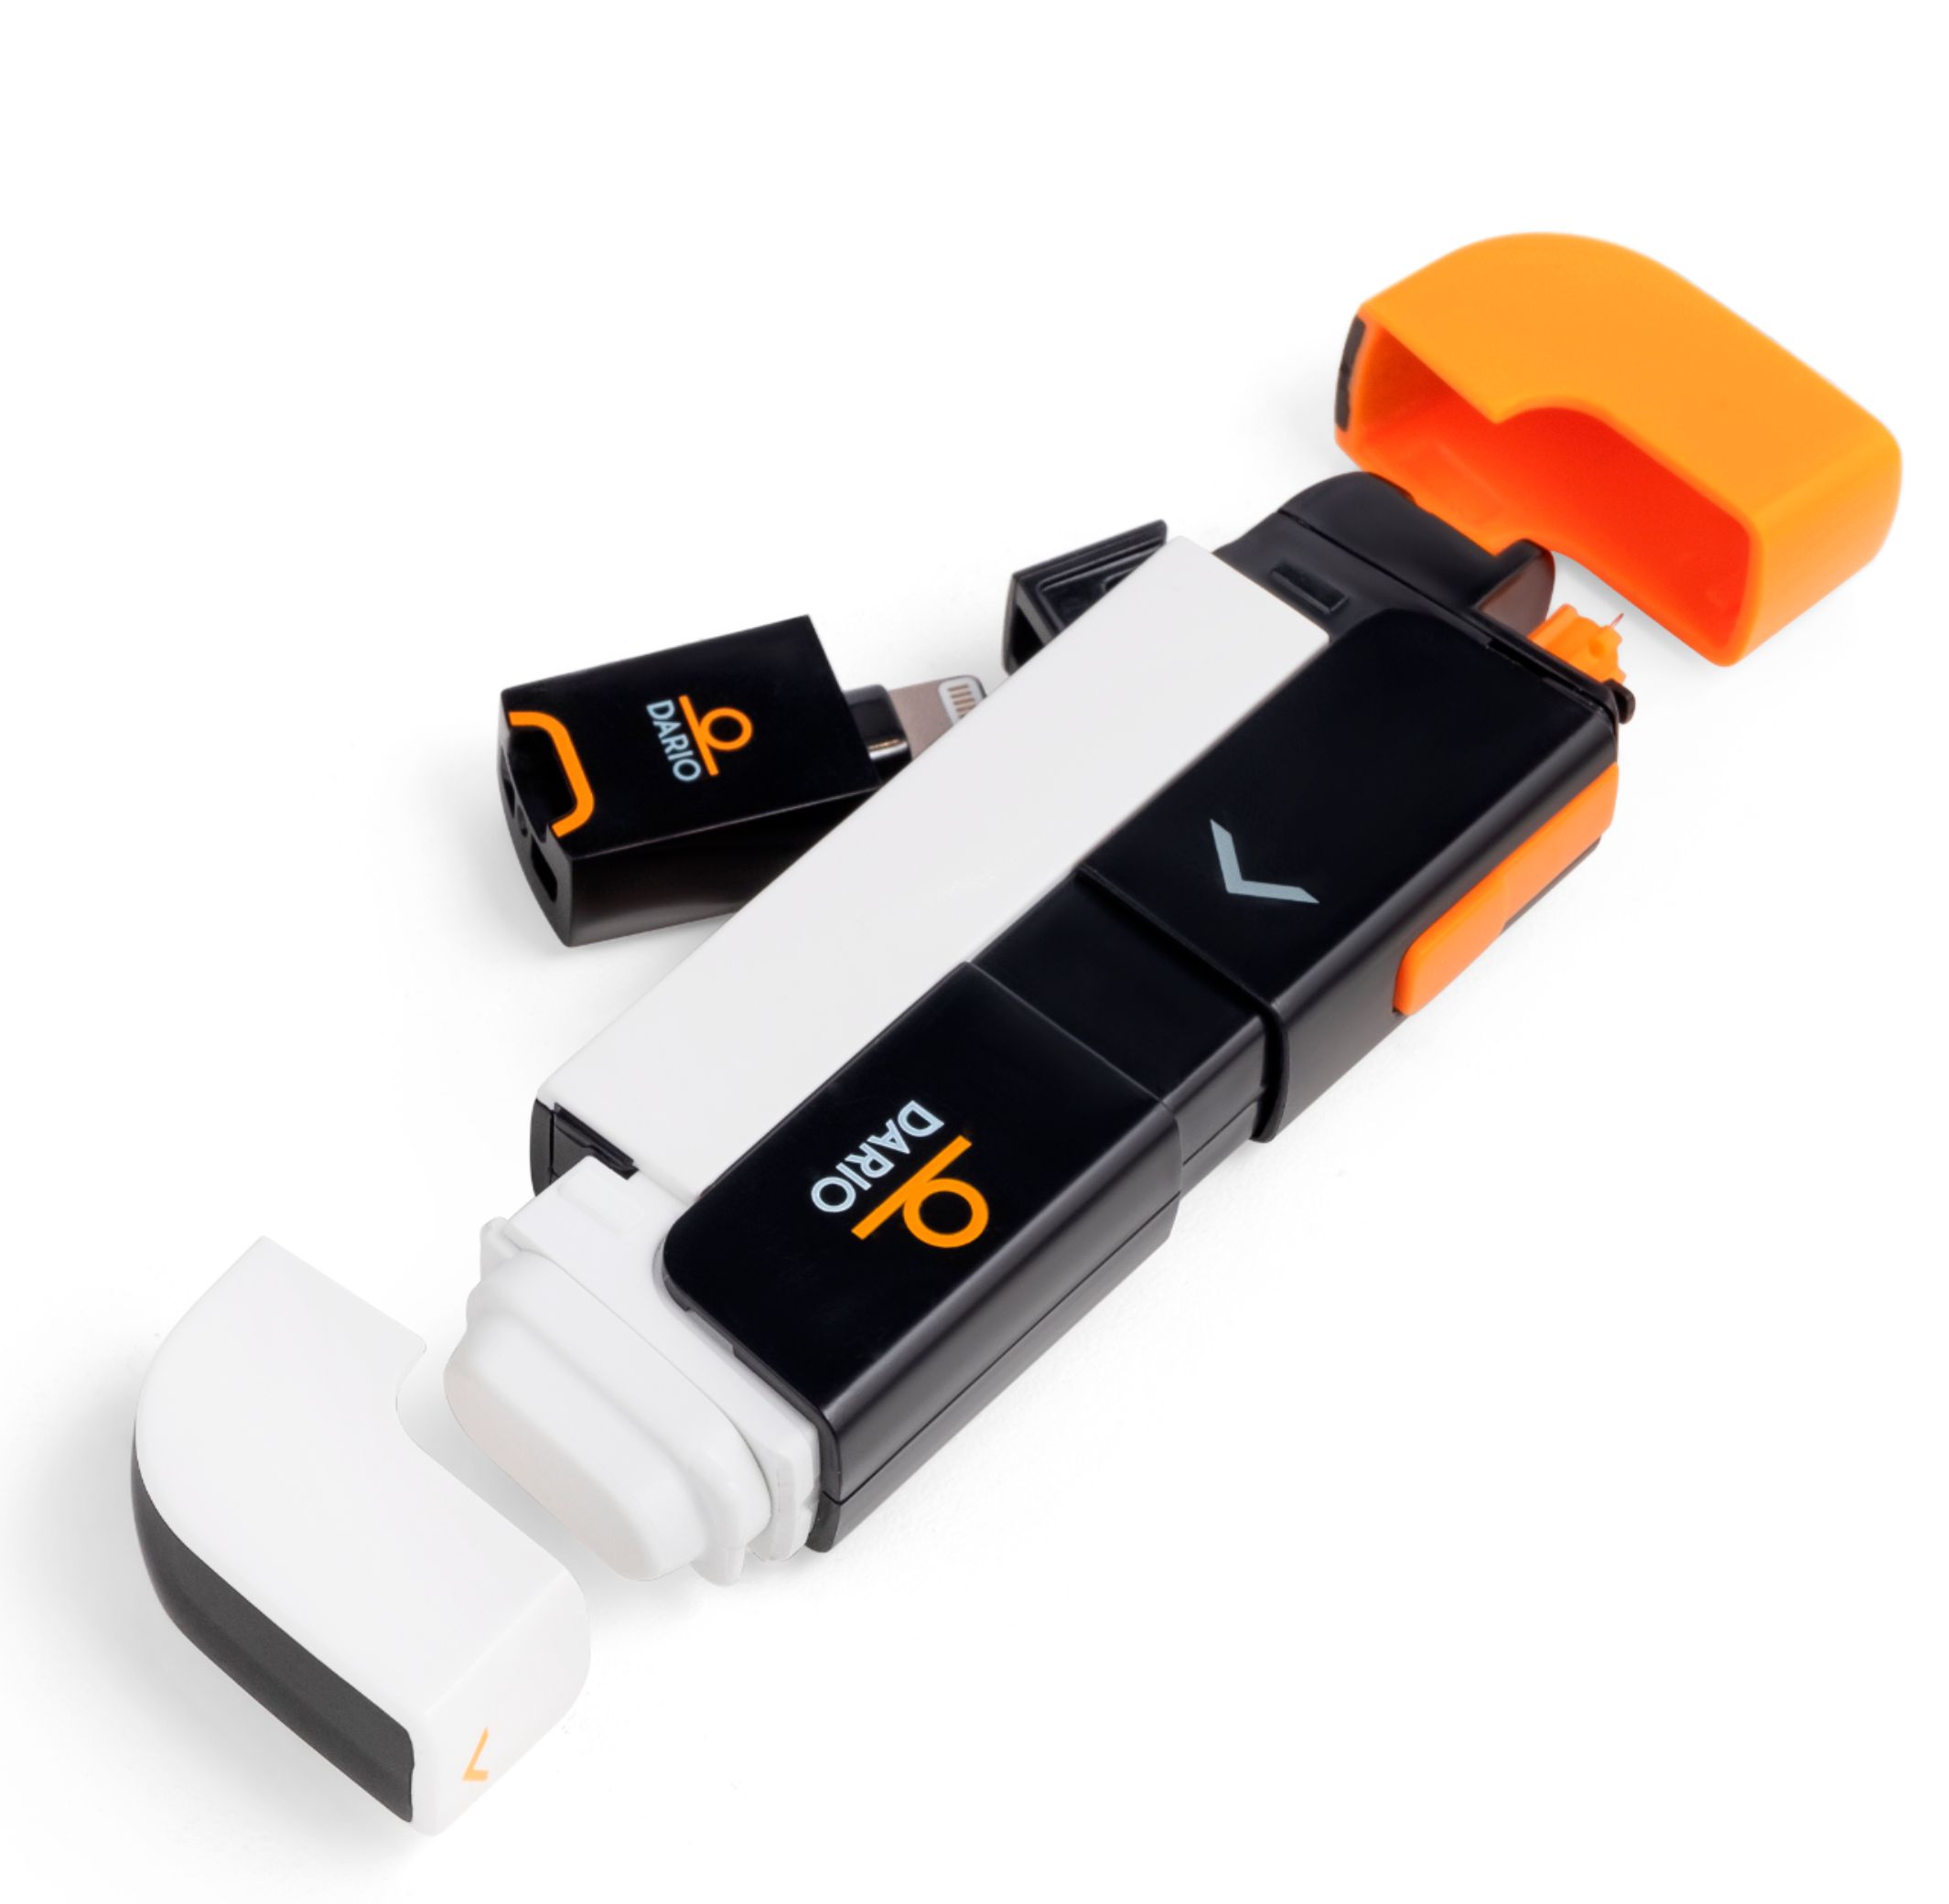 Dario Blood Glucose Monitor Kit  Monitor & Manage Diabetes with Ease -  Biometric Sports Solutions